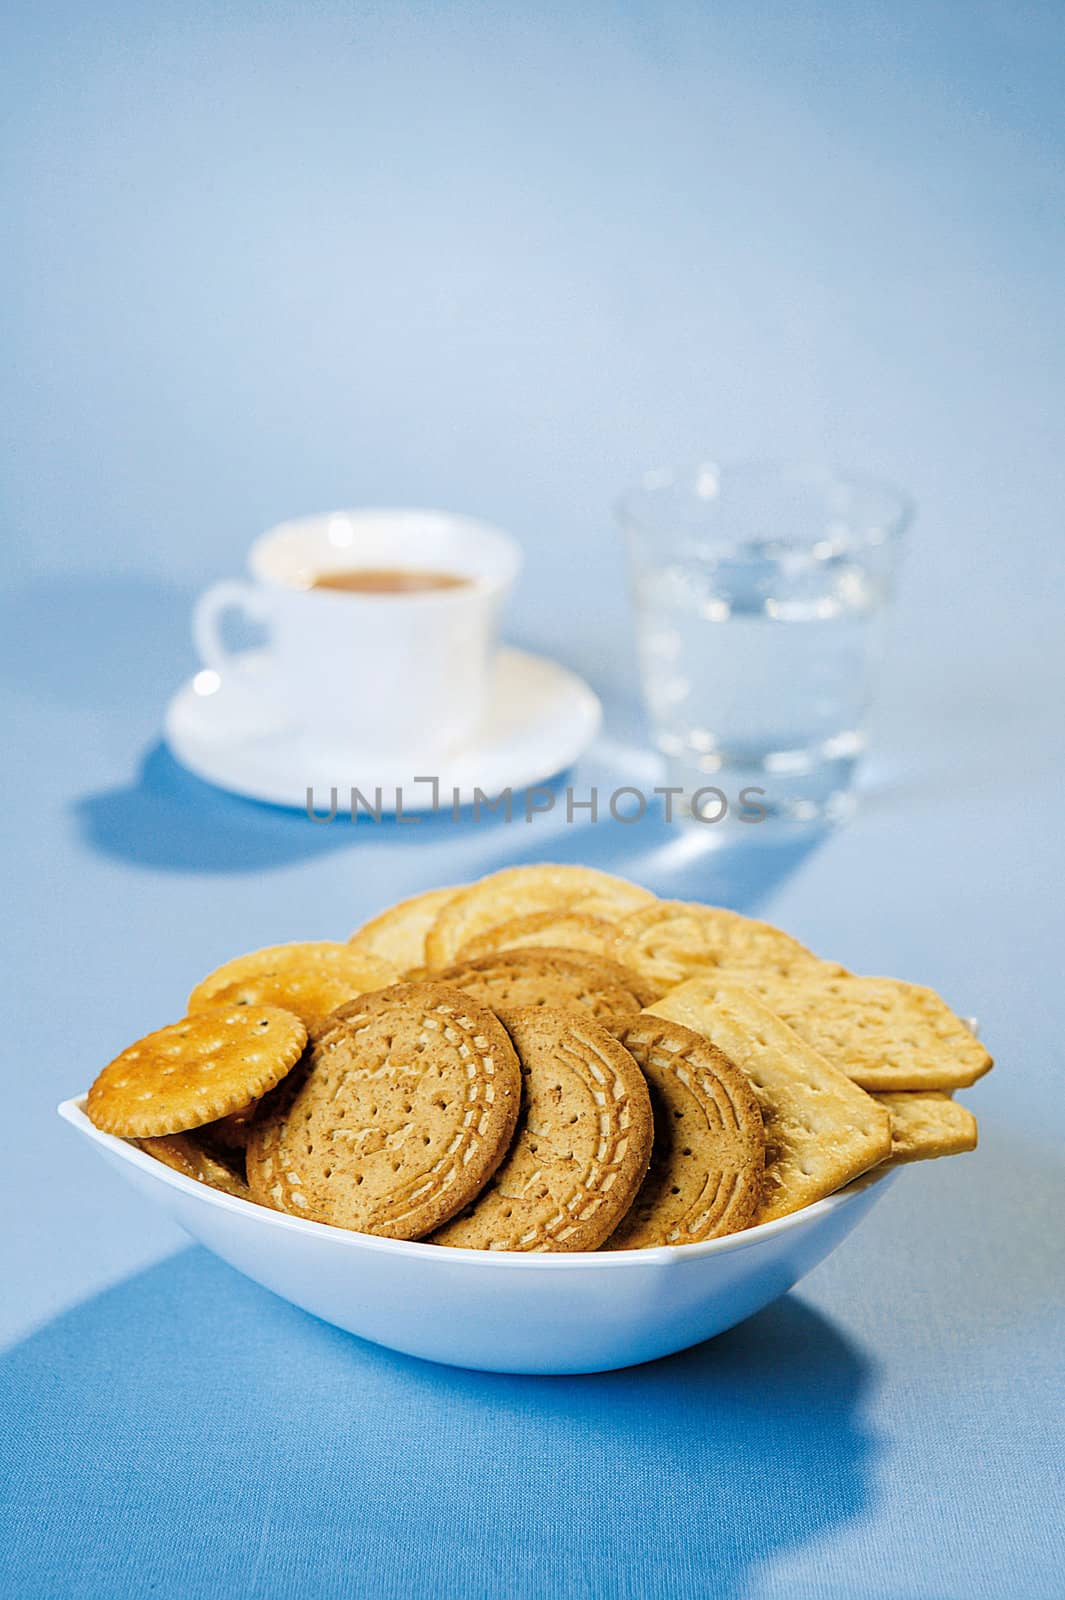 Crackers and coffee on a table by hanusst